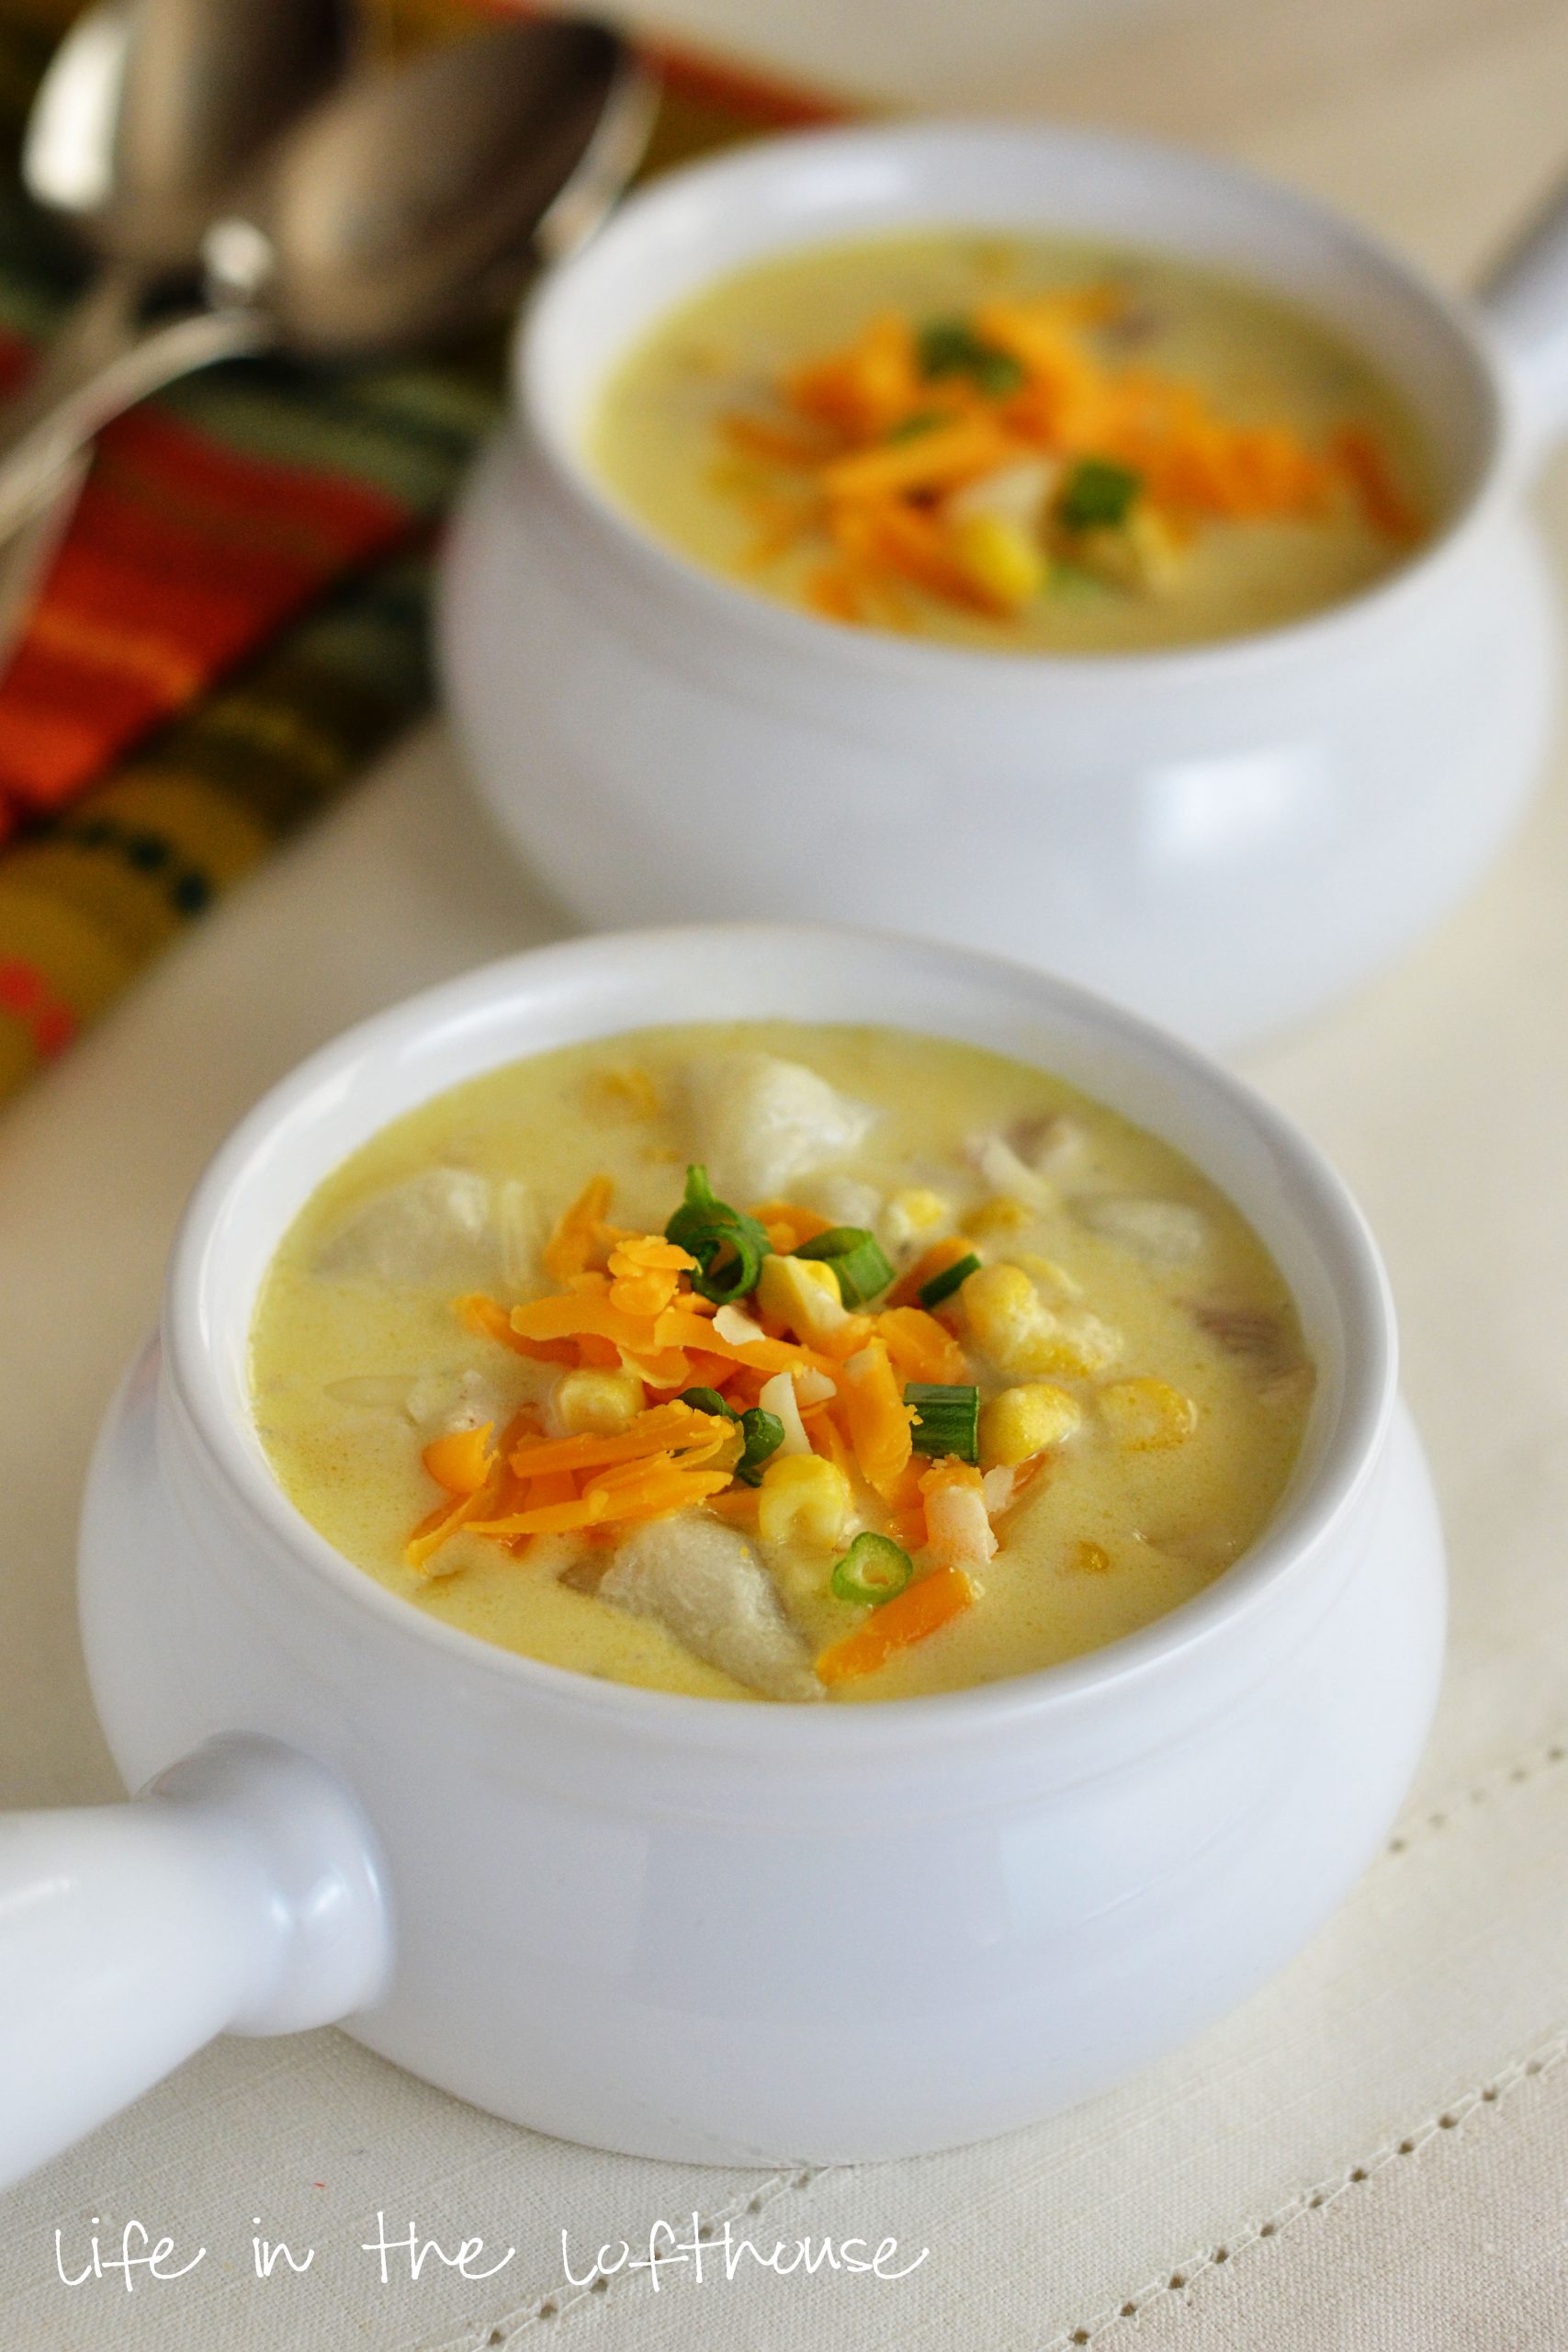 Chicken Corn Chowder is a thick and creamy soup with chunks of potato, chicken, bacon and of course corn. Life-in-the-Lofthouse.com